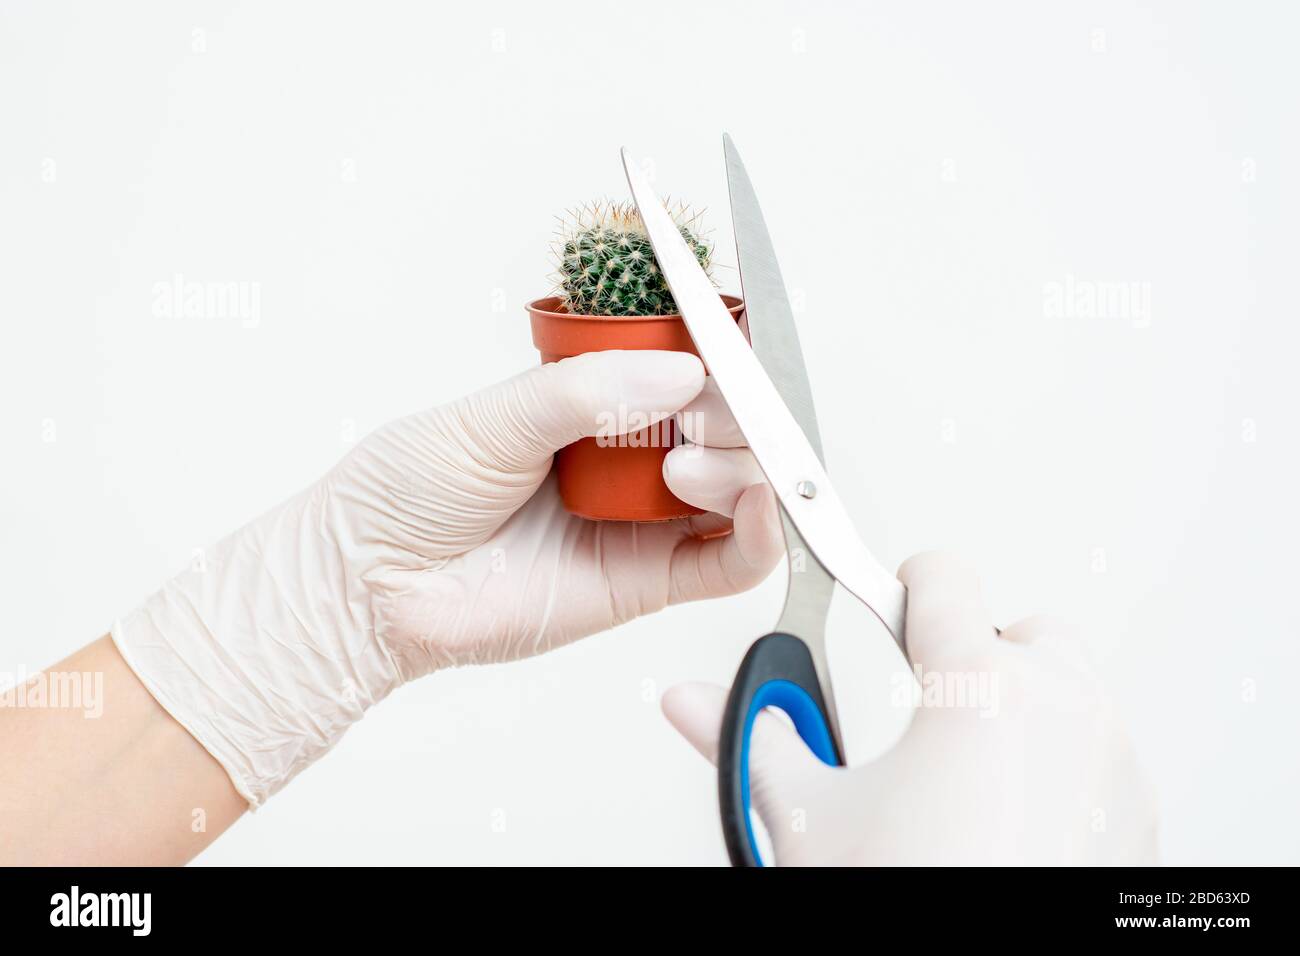 Hands in white gloves of cosmetologist cutting needles of cactus in pot. Haircut of a cactus by a hairdresser or beautician. Concept of haircut and epilation. Stock Photo